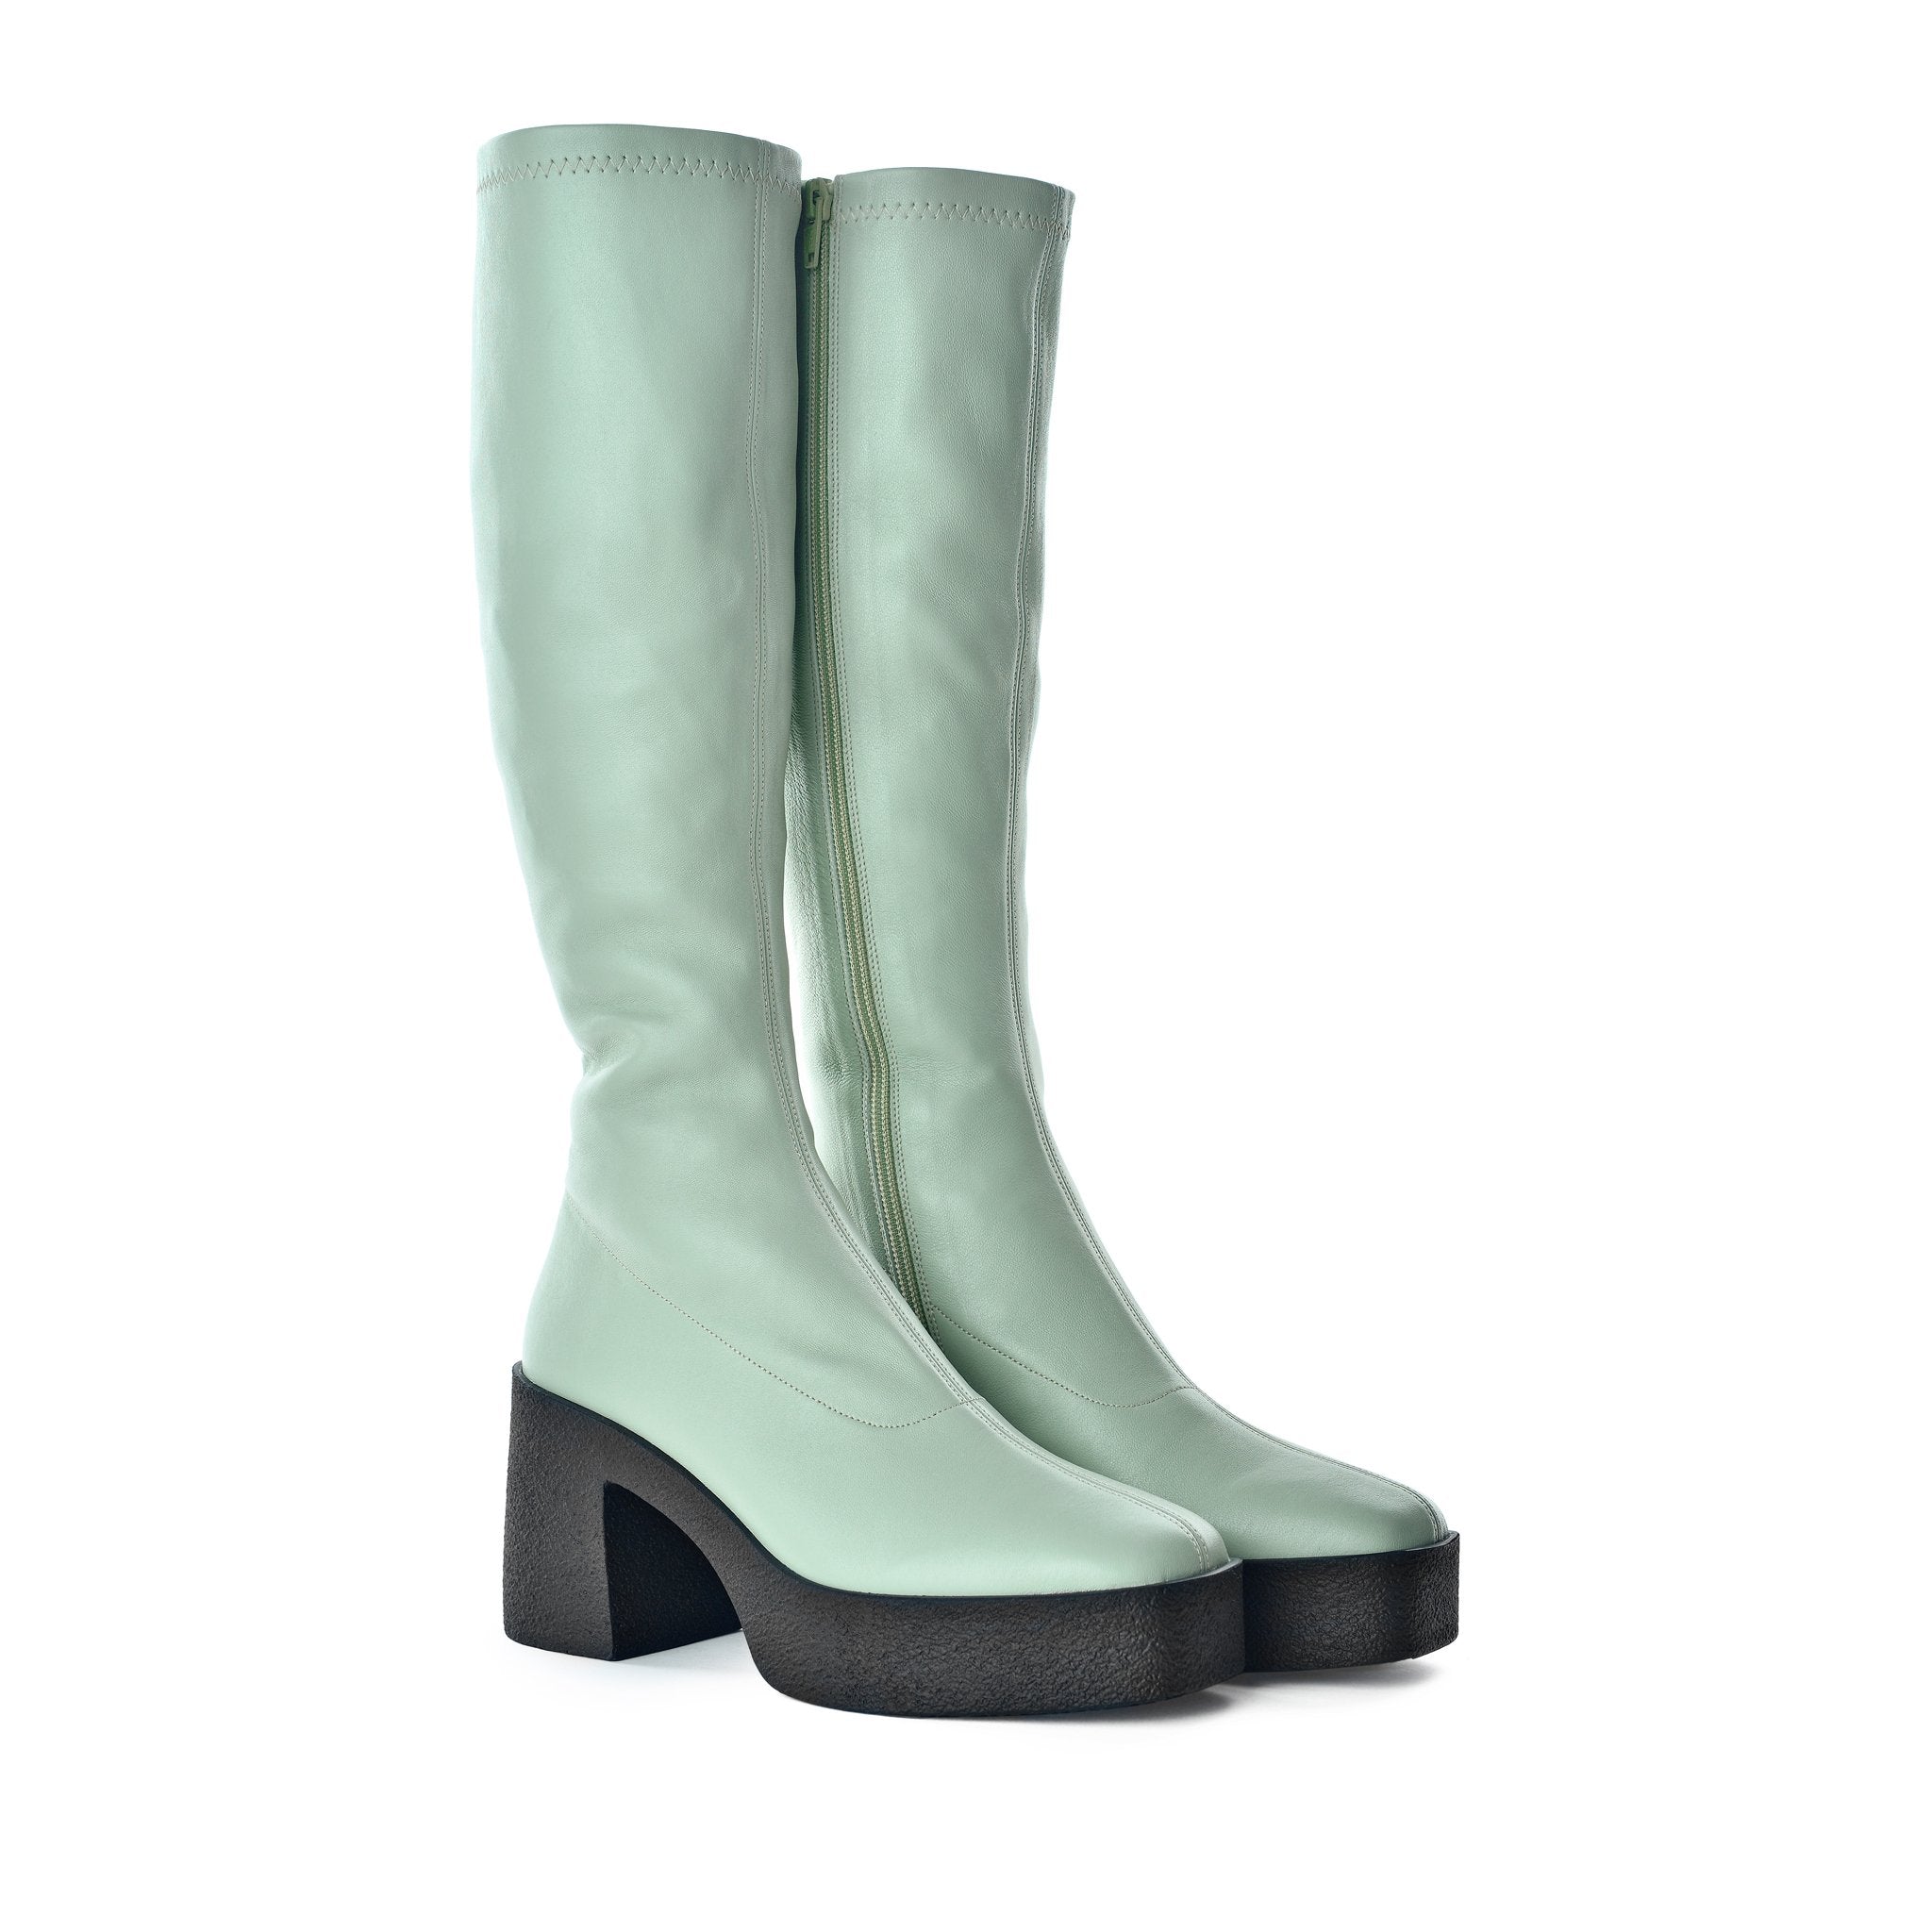 Izumi Pastel Green Stretch Leather Chunky Boots 20077-01-08 - 3